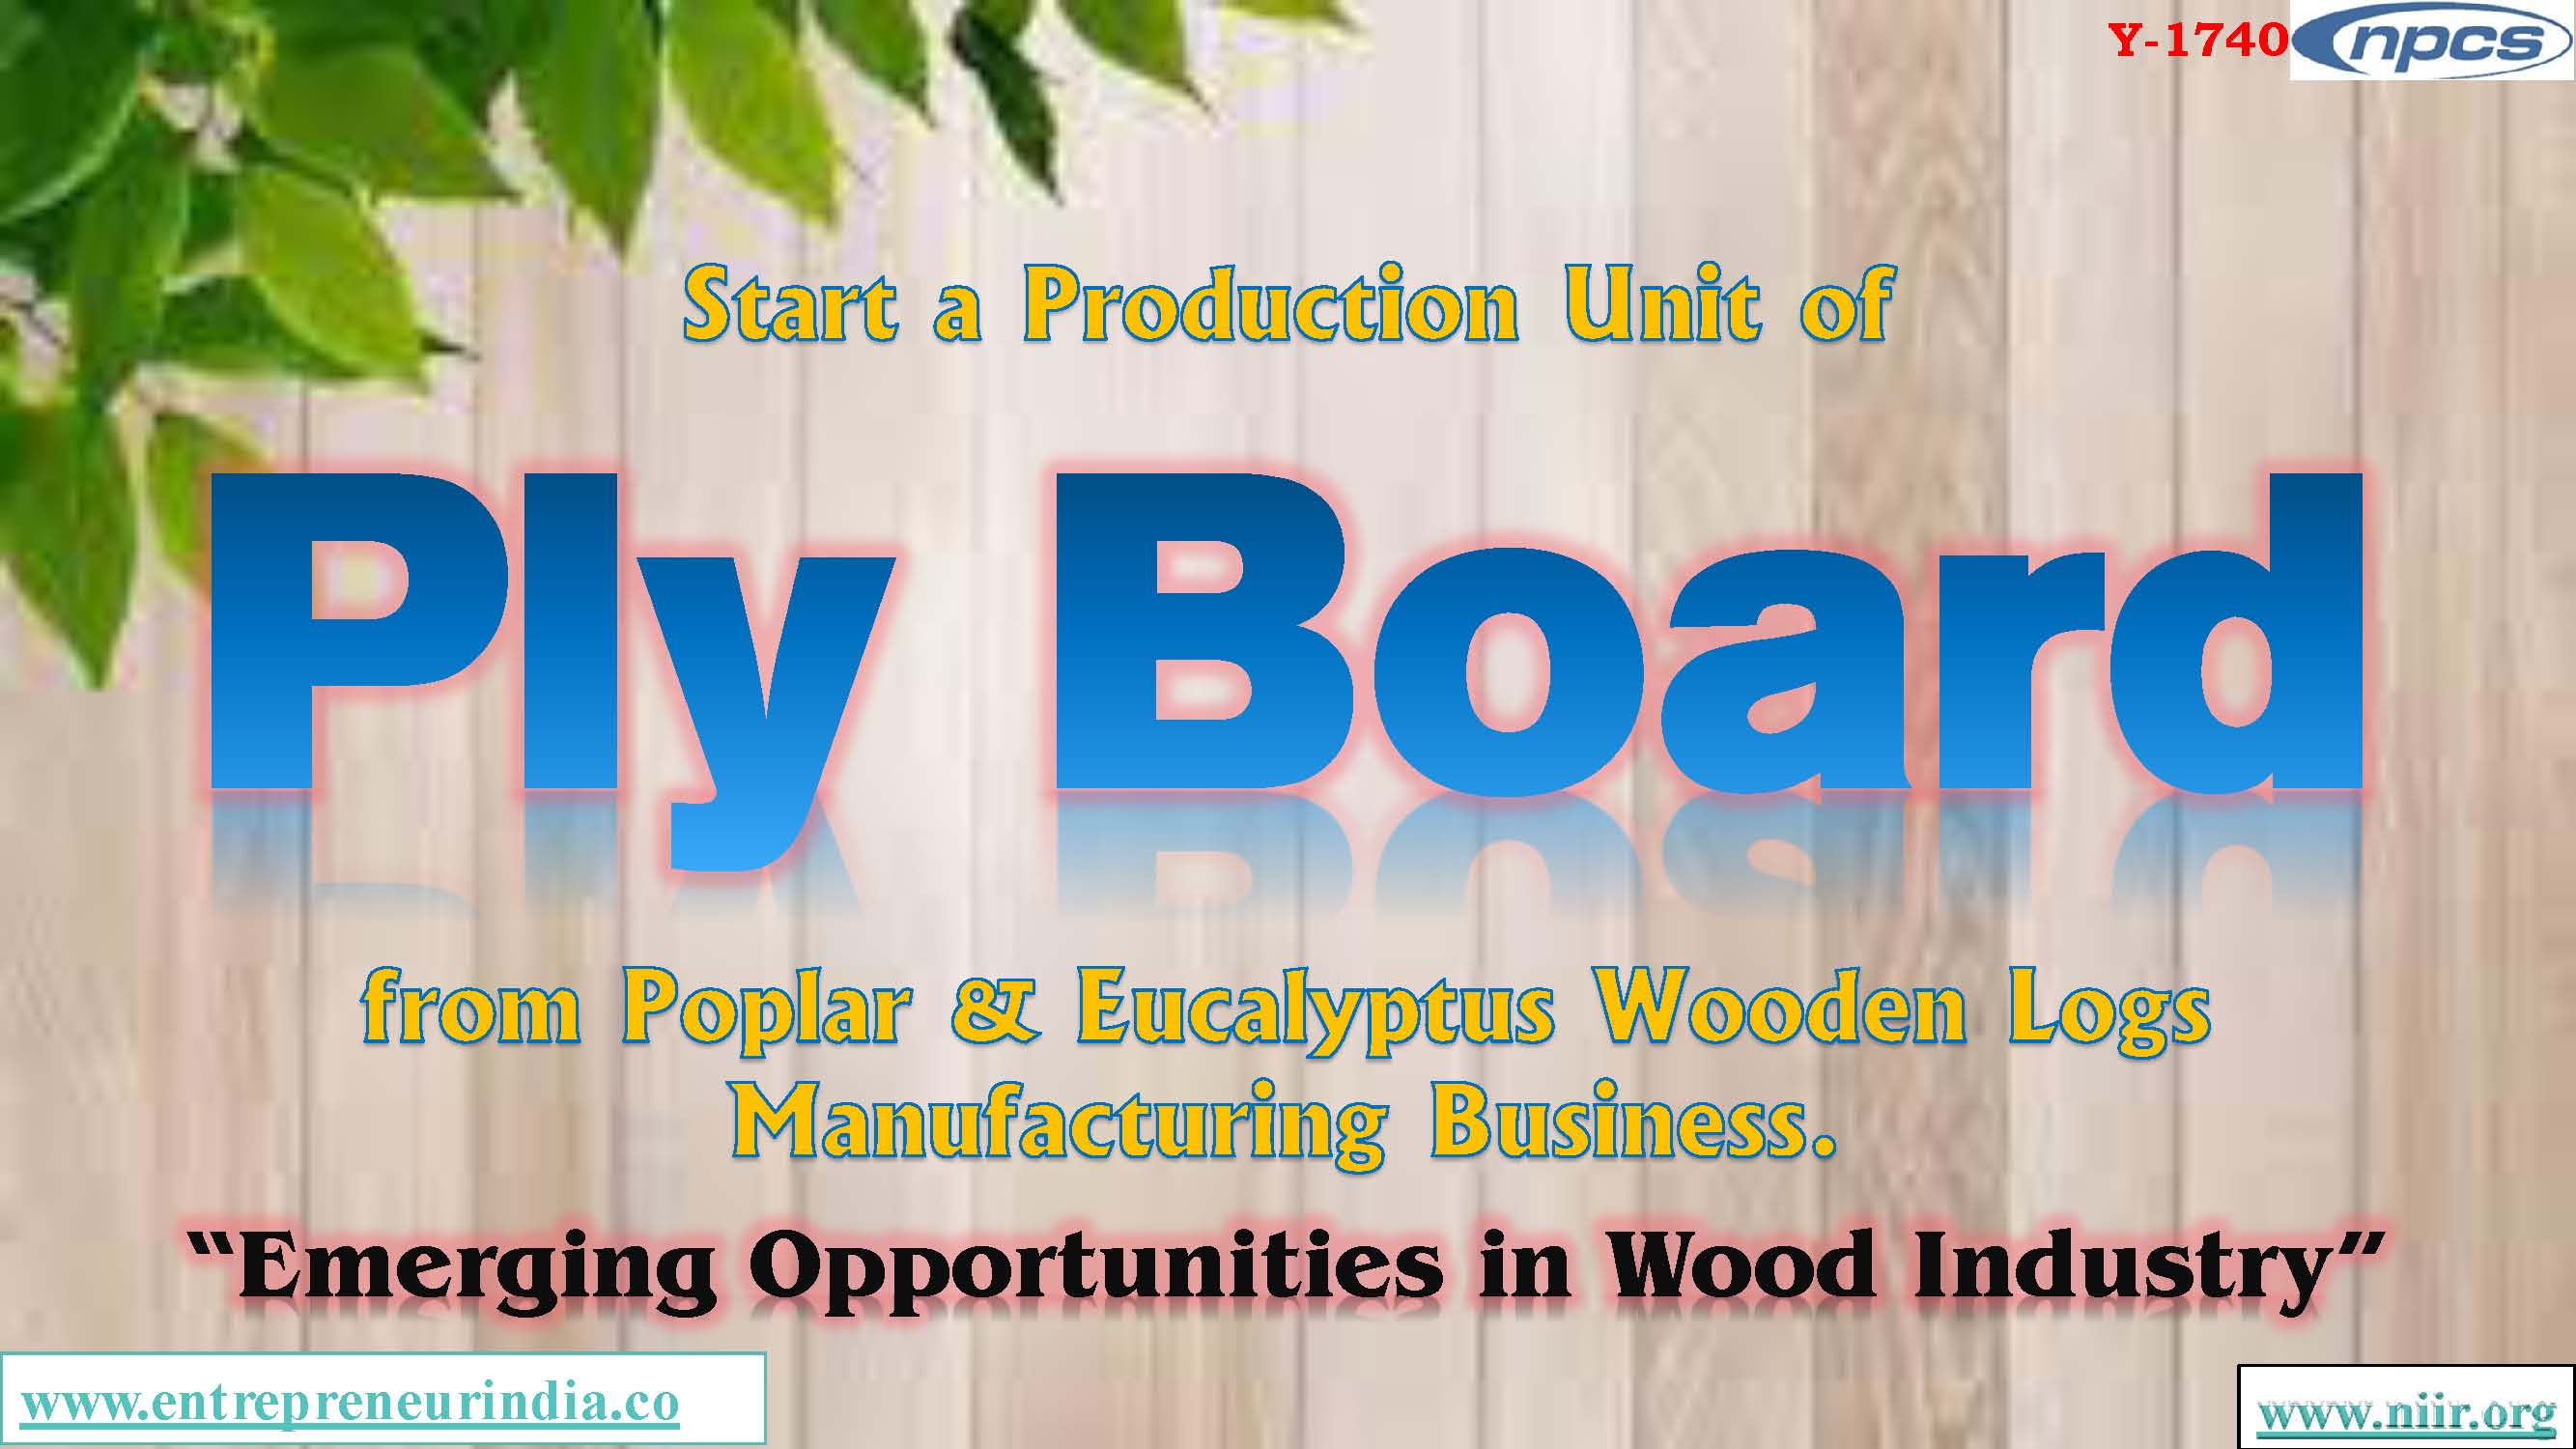 Start a Production Unit of Ply Board from Poplar & Eucalyptus Wooden Logs Emerging Opportunities in Wood Industry